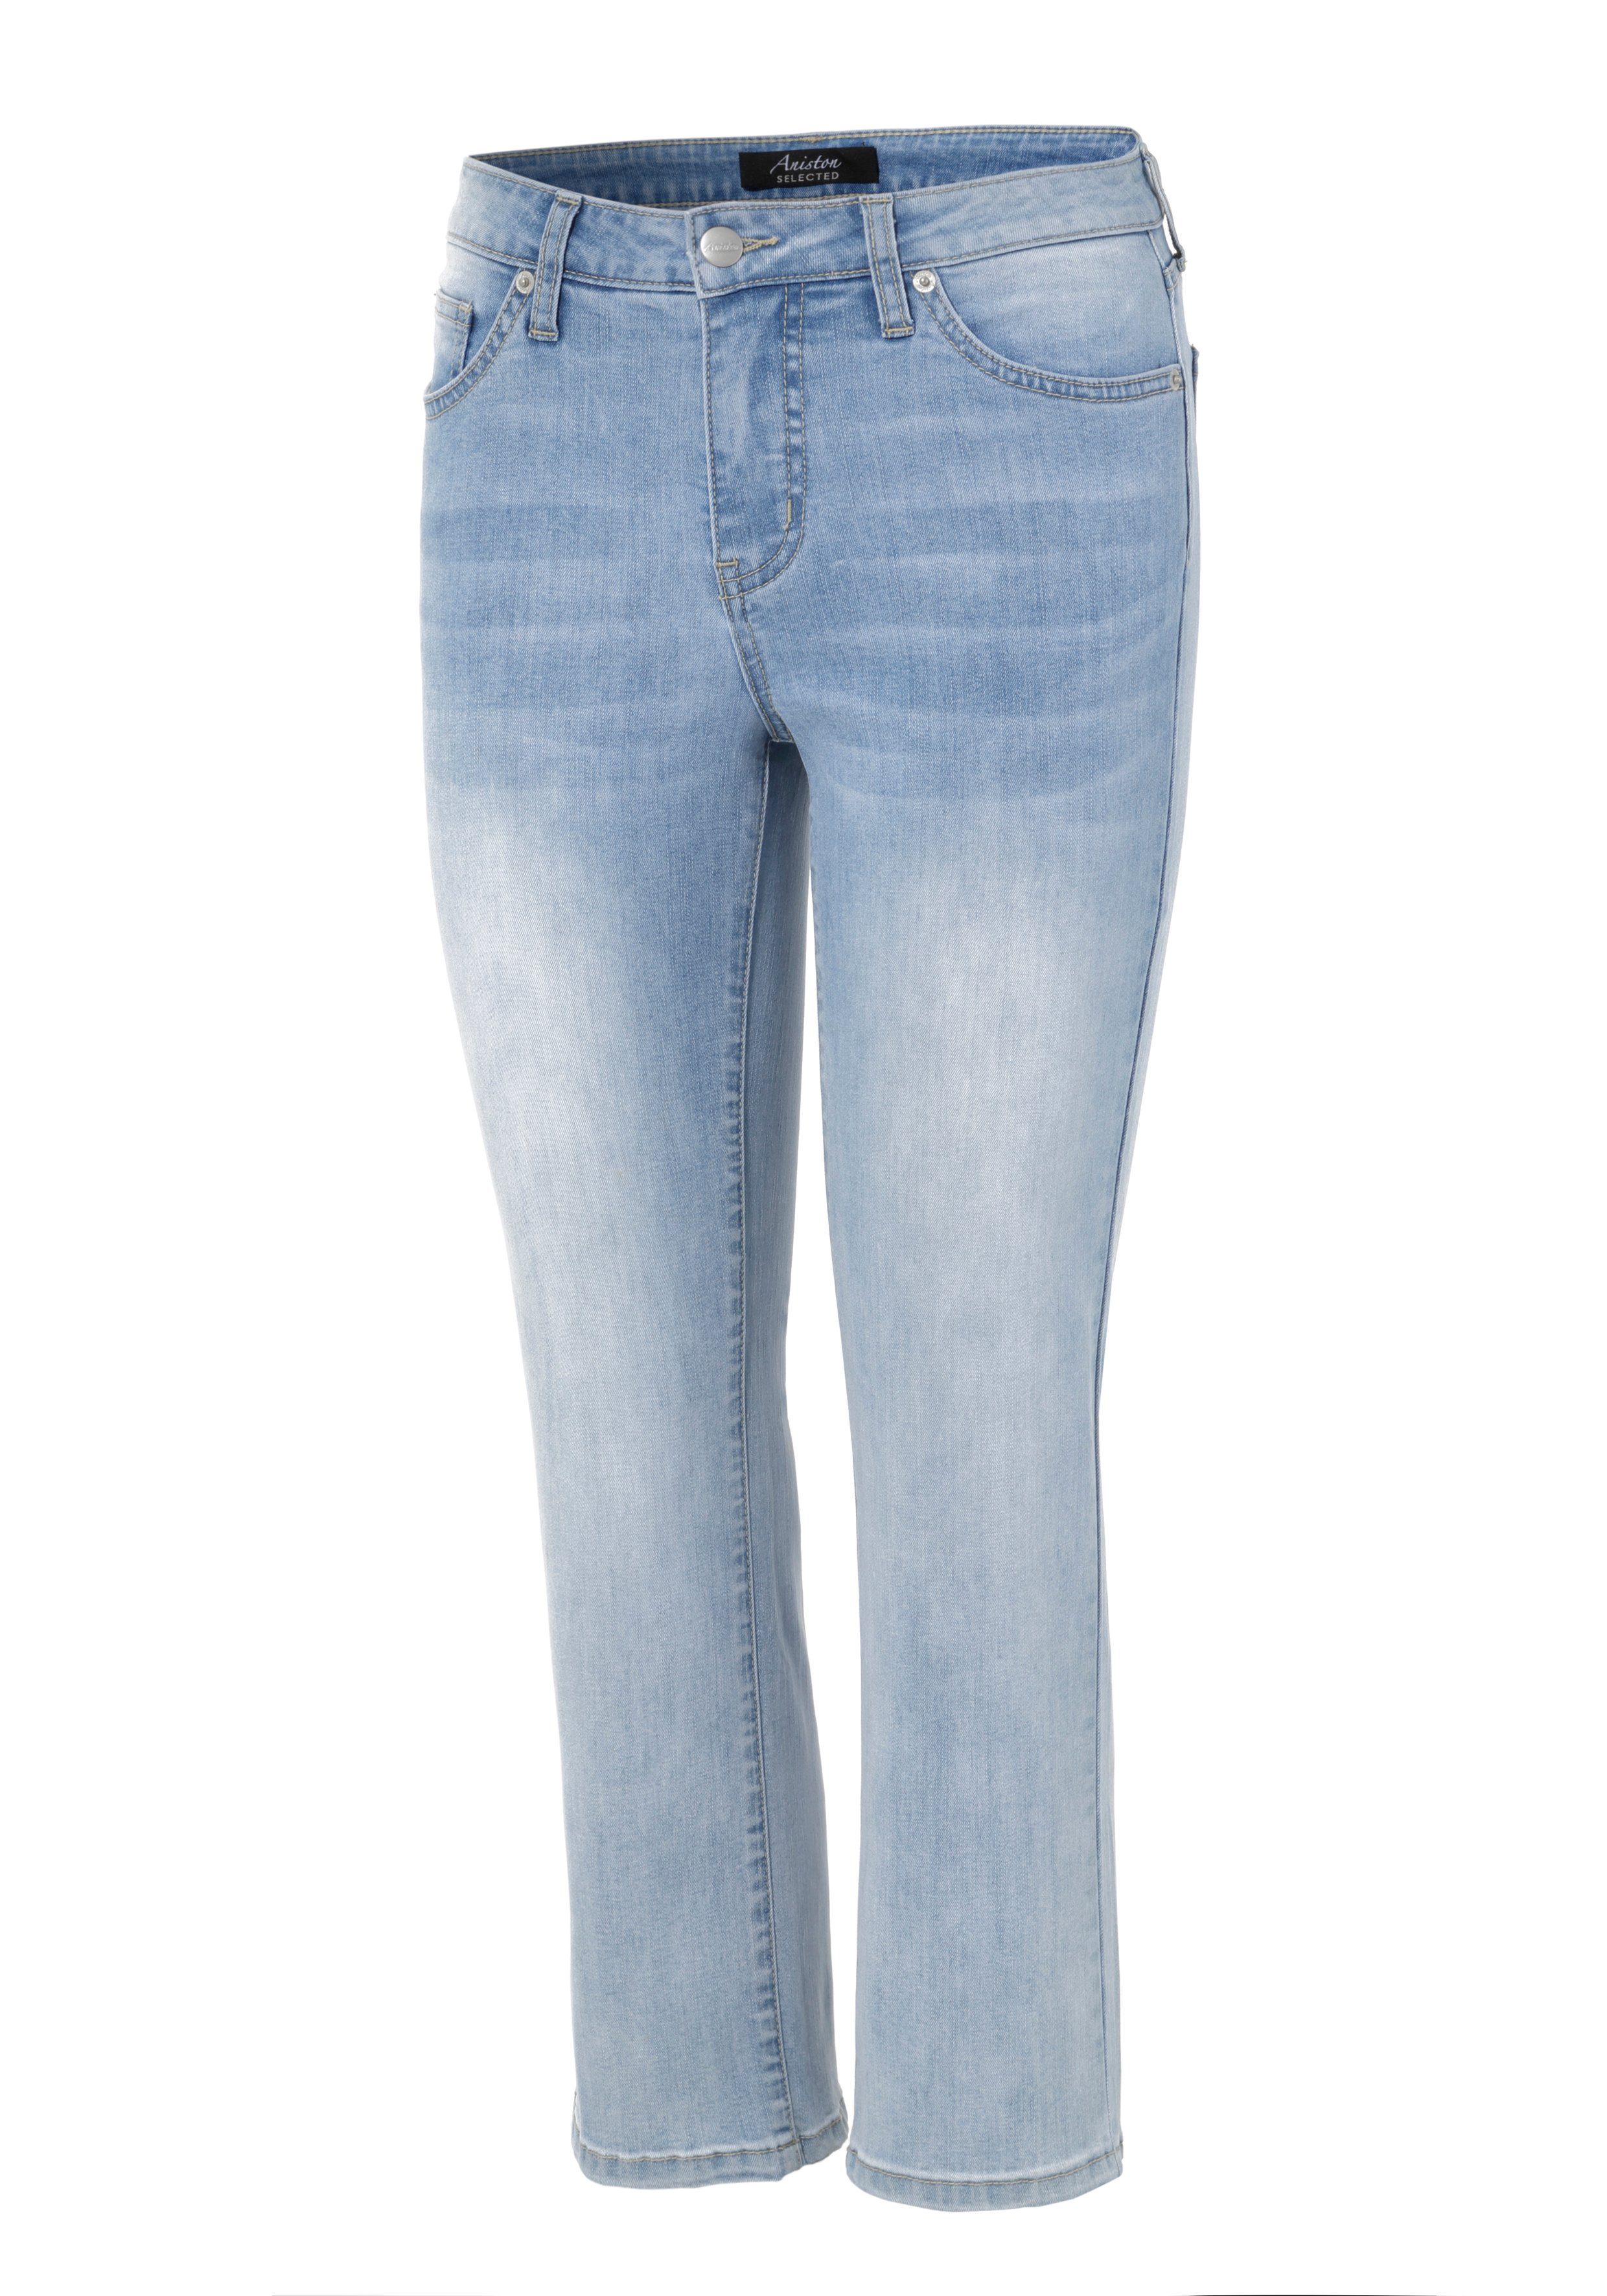 Aniston SELECTED Straight-Jeans in verkürzter cropped Länge light-blue-washed